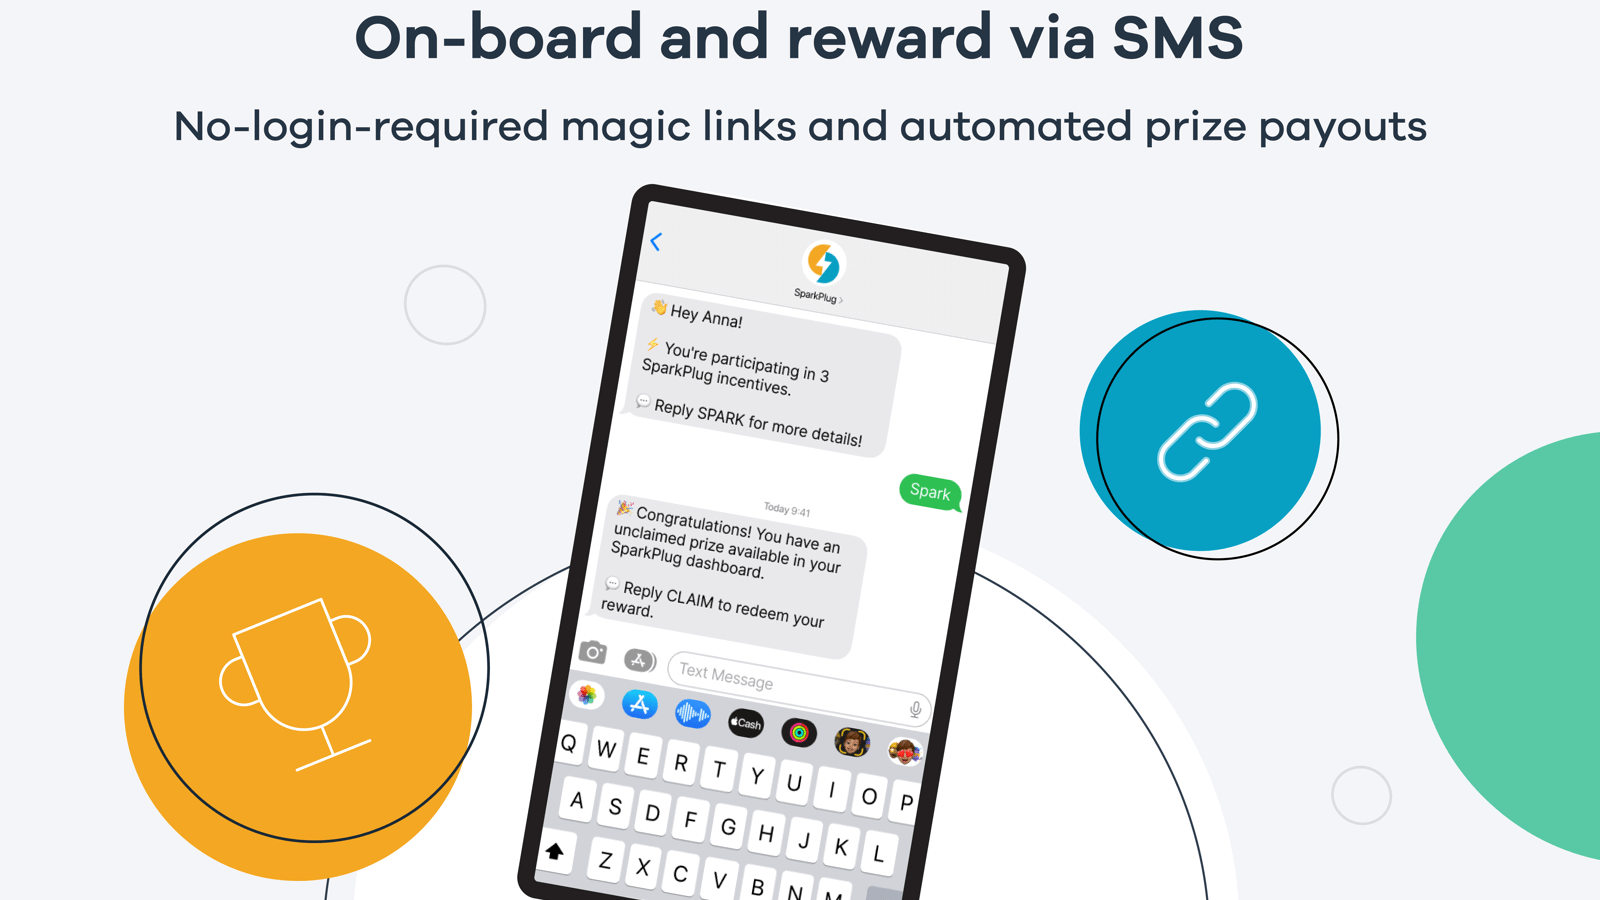 Simple onboarding, notifications, and payouts via SMS magic link